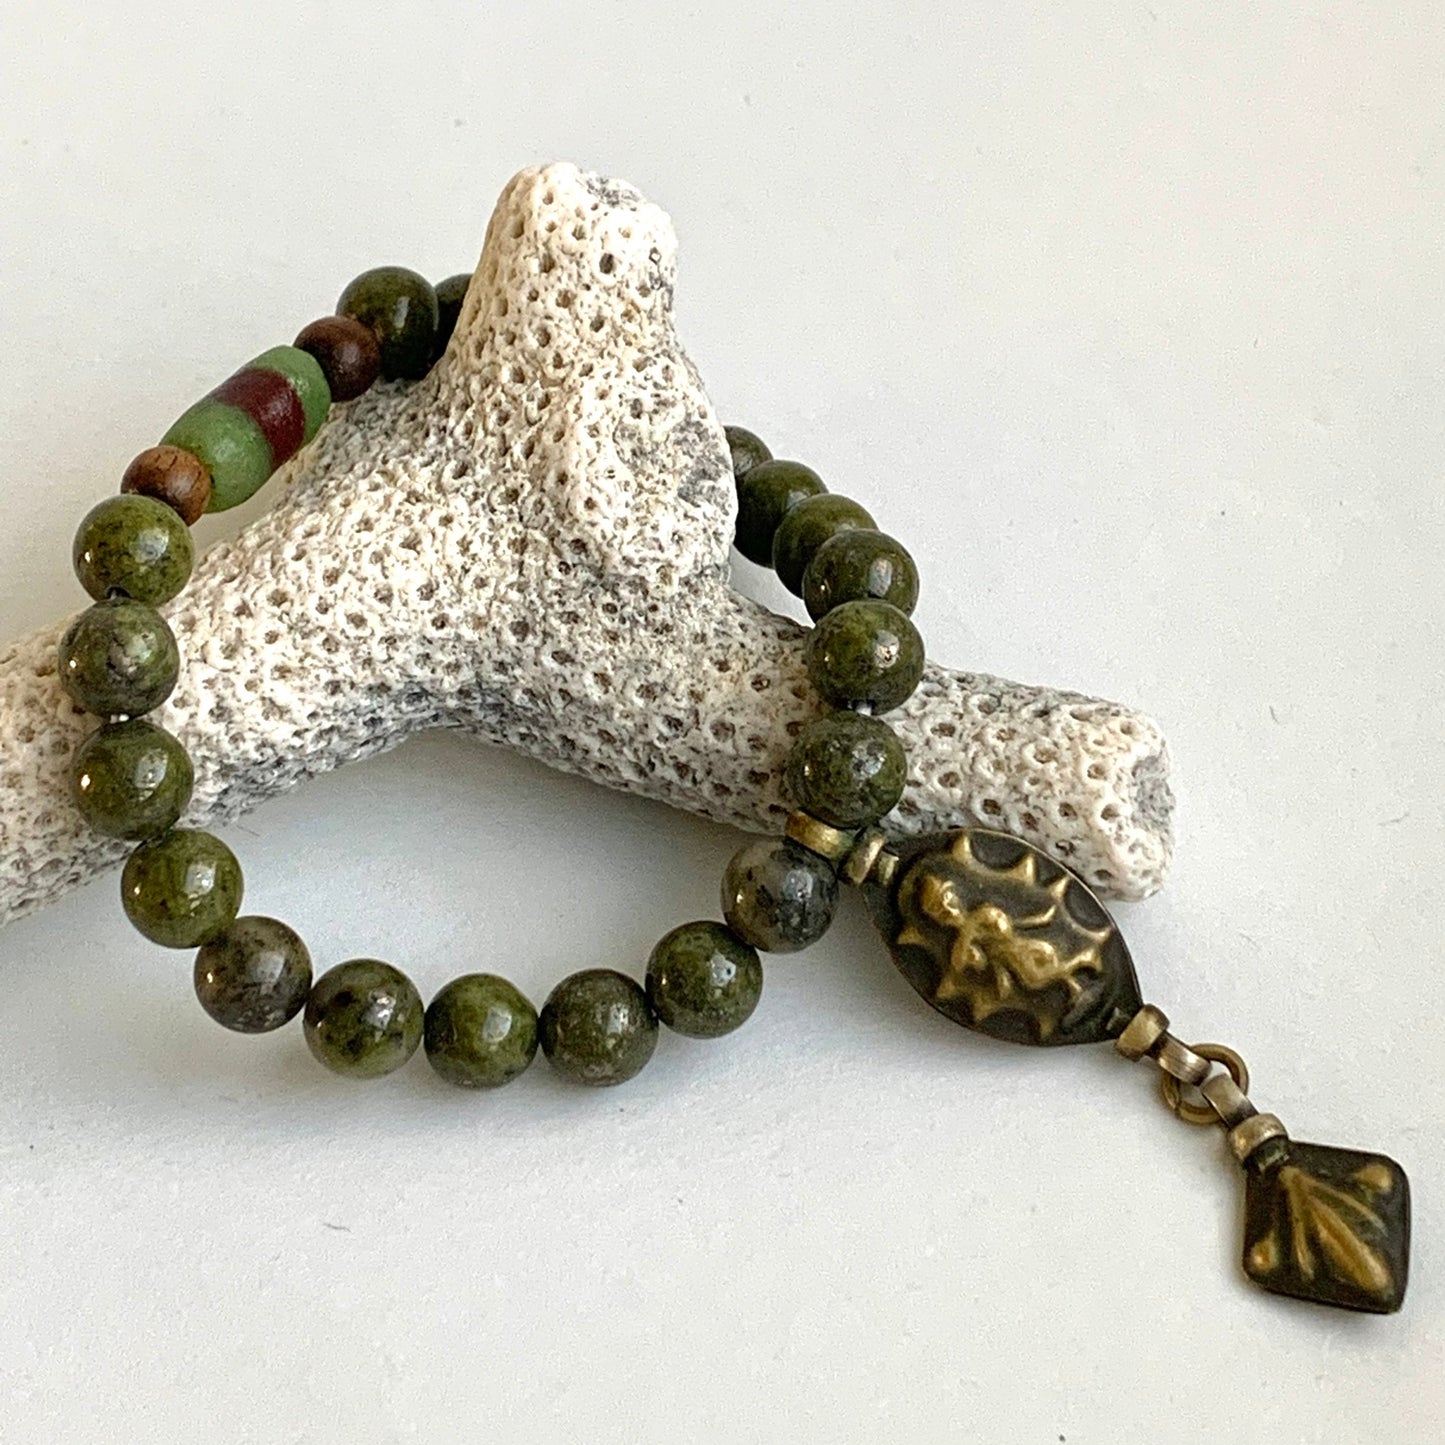 Beaded mala bracelet for yoga and meditation - African Jasper beads - gifts for yoga moms - earthy jewelry - boho style